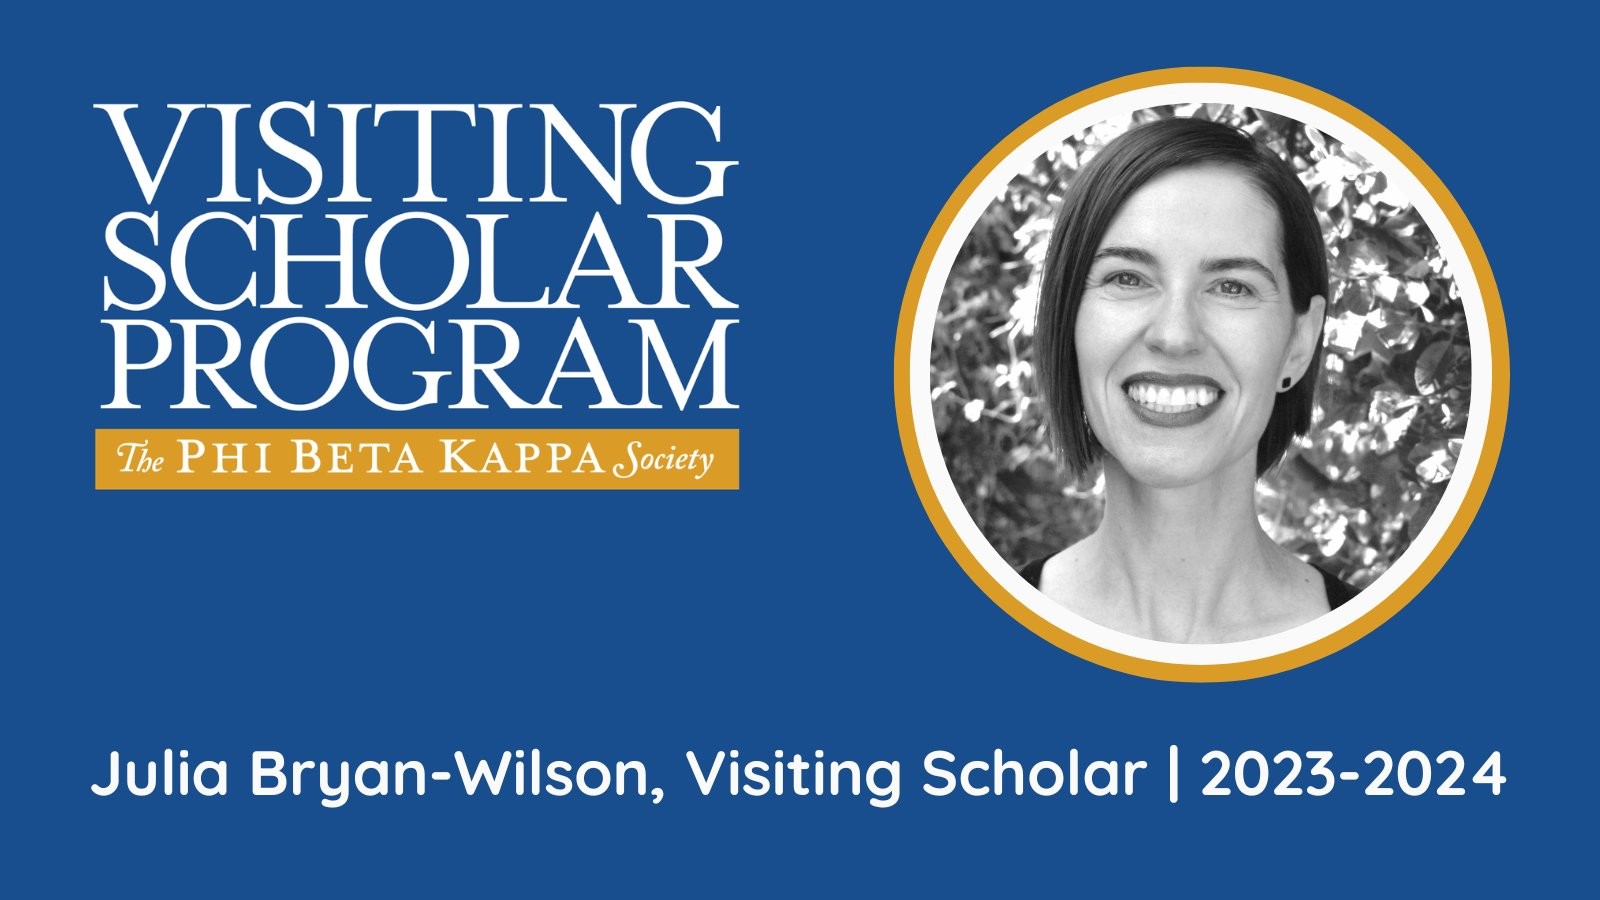 Text on blue background that reads Visiting Scholar Program The Phi Beta Kappa Society Julia Bryan-Wilson, Visiting Scholar 2023-24 with a photo of Julia Bryan-Wilson